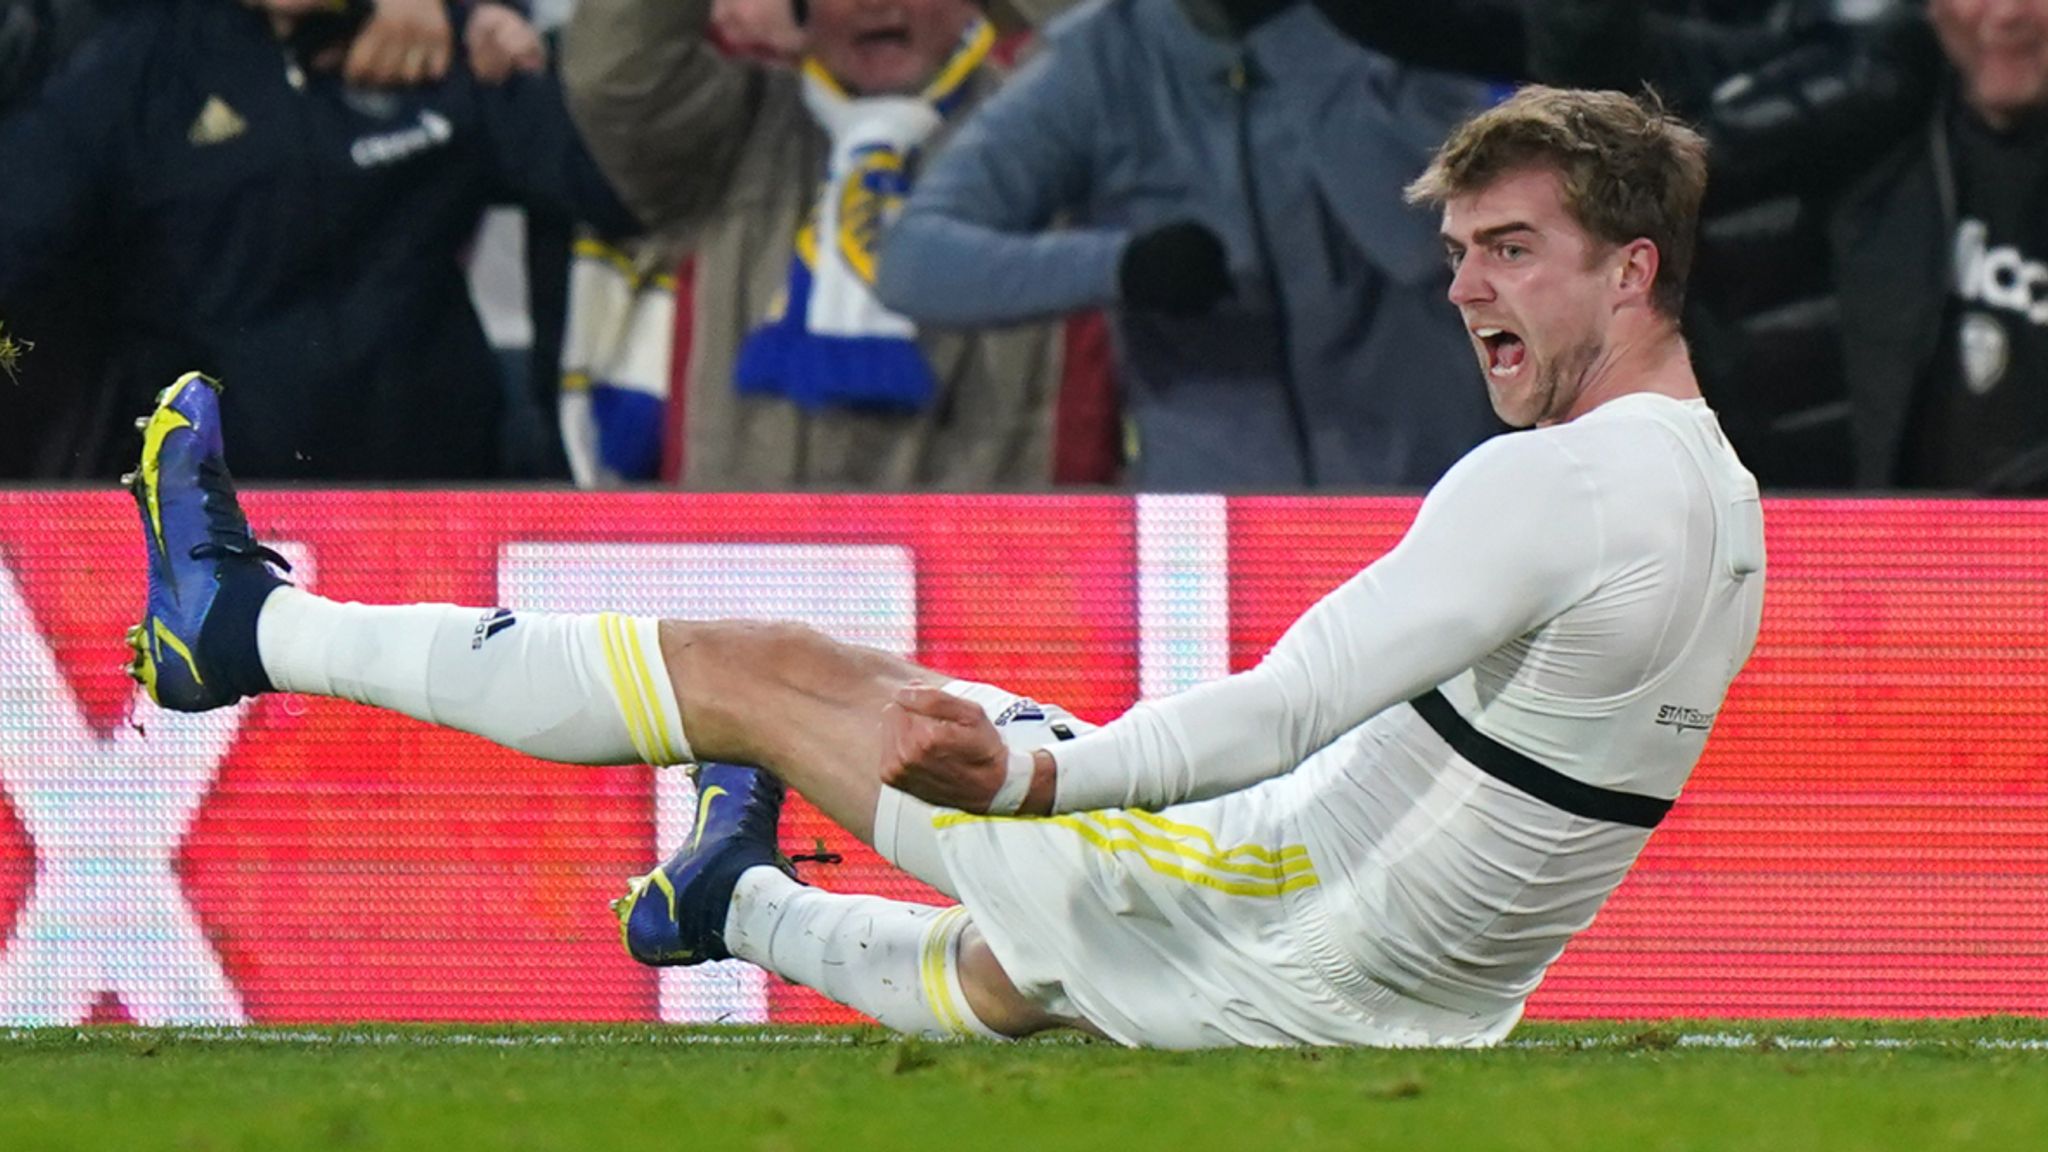 Leeds United 2 2 Brentford Patrick Bamford S 95th Minute Equaliser Salvages Point For Hosts Football News Sky Sports